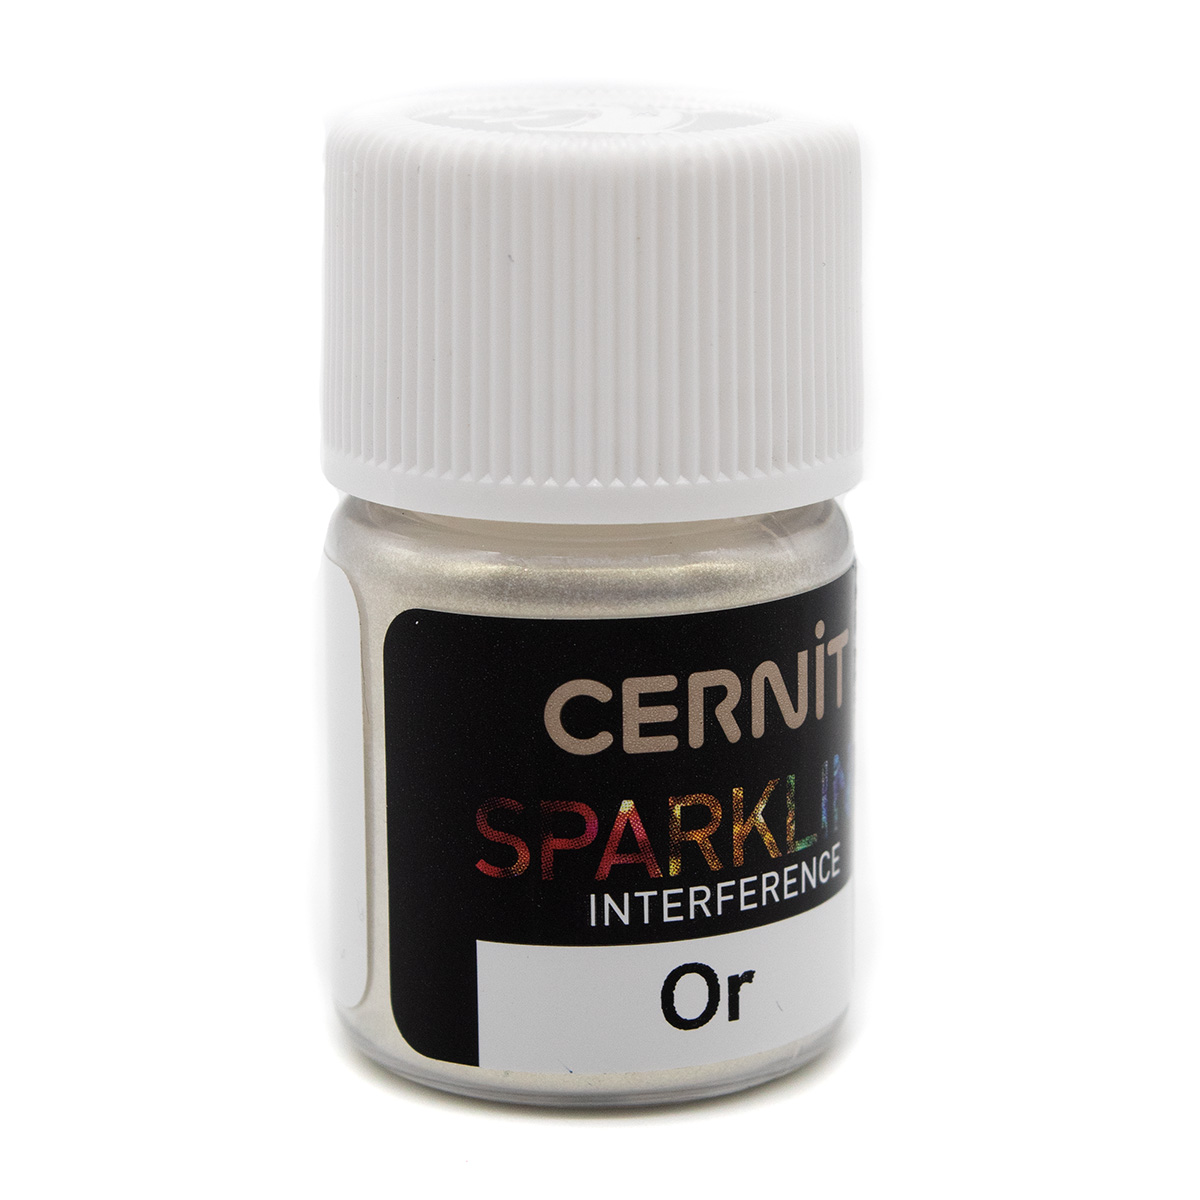 CE6110005 Мика-порошок (слюда) Cernit Interference SPARKLING POWDER золото, 5 г 50g sparkling pearl white type 183 mica powder acrylic paint dye colorant in craft art soap car pai